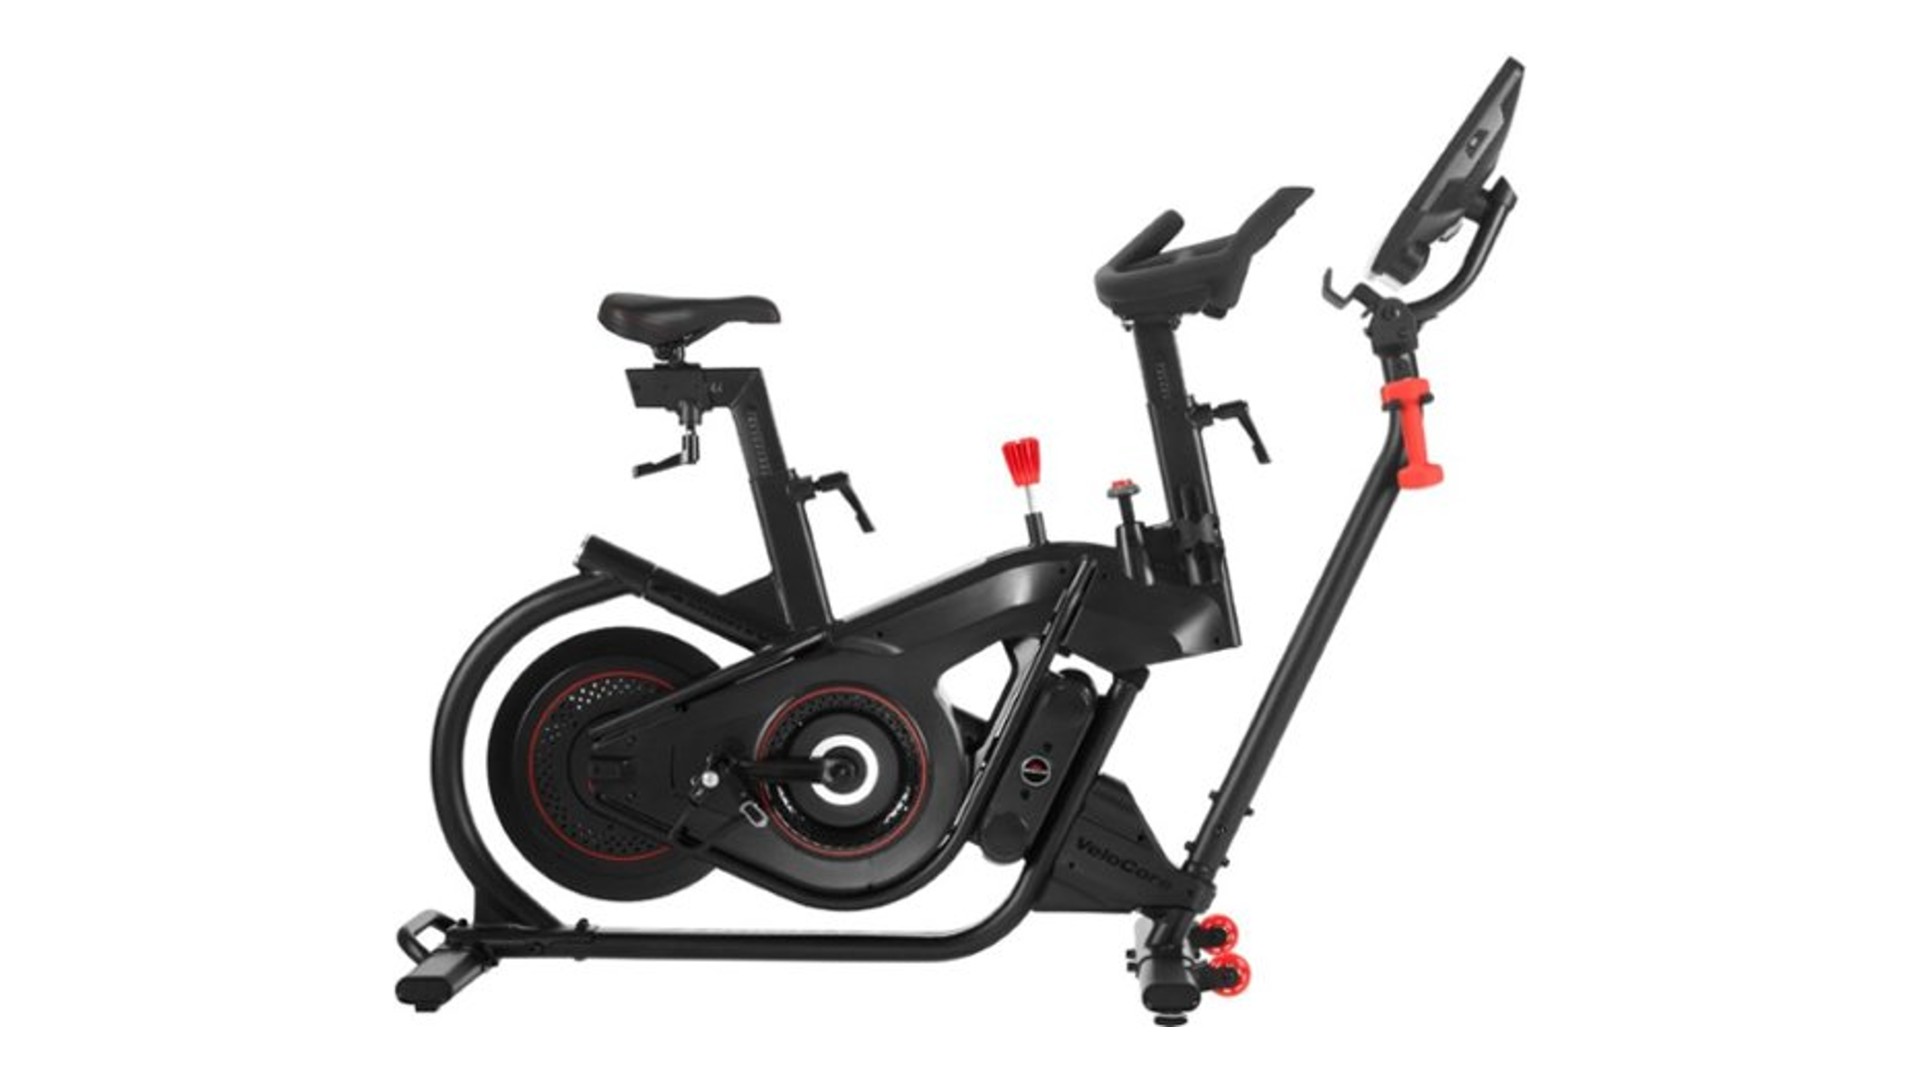  $1000 off the Bowflex VeloCore Bike, now $799.99 at Best Buy 